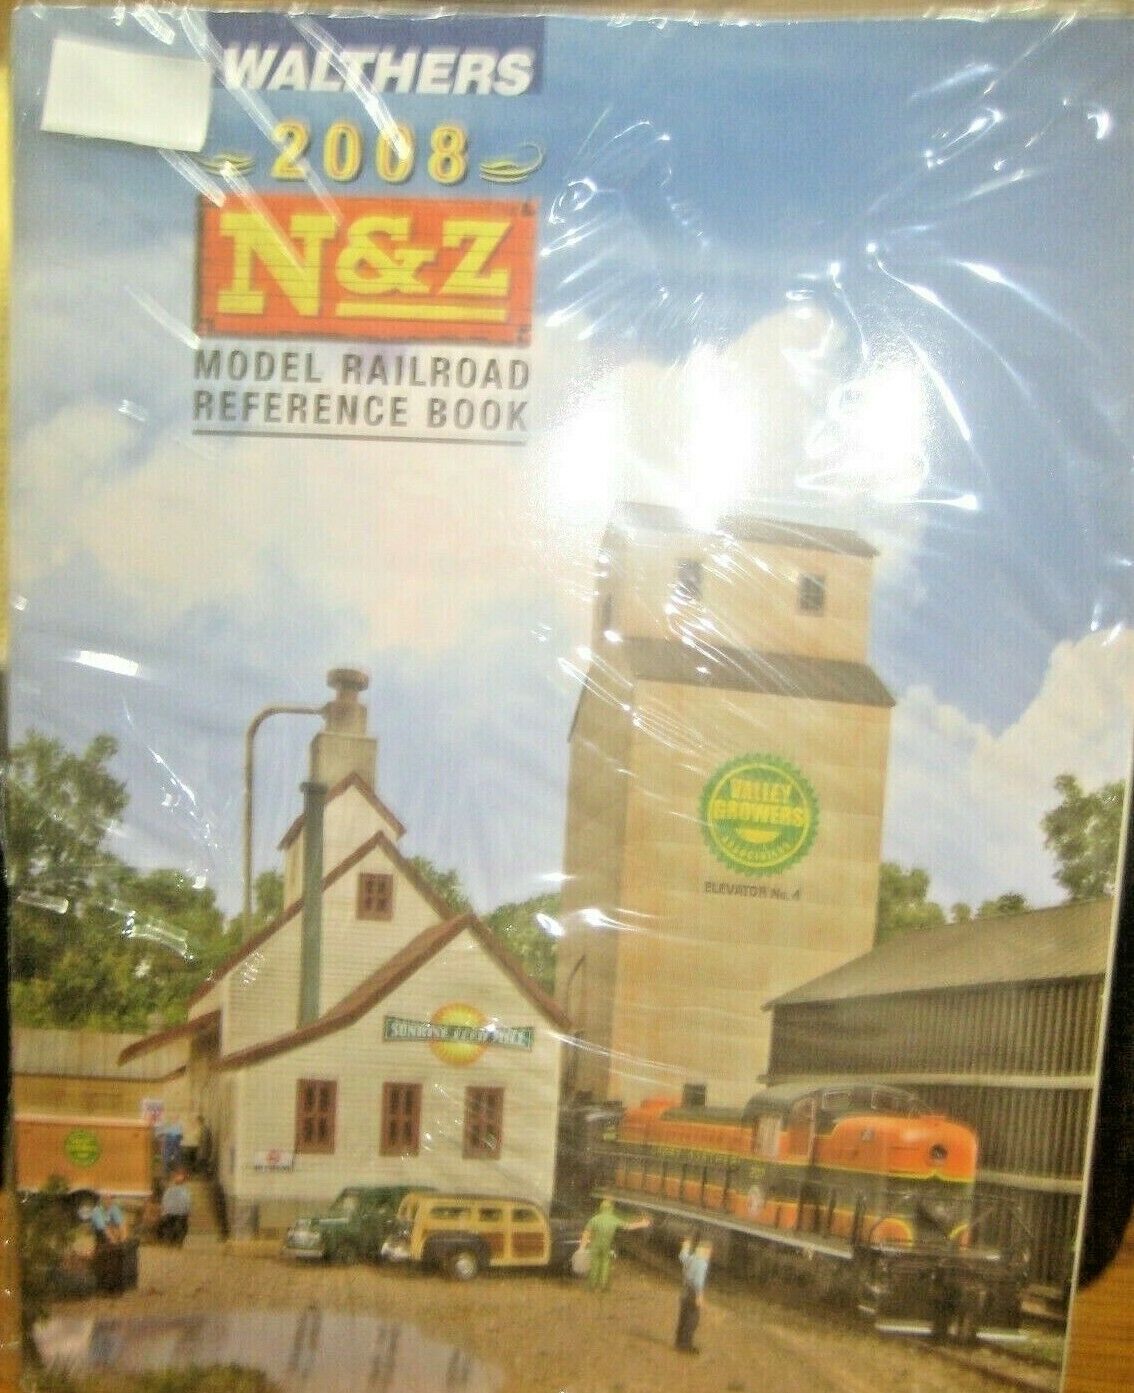 WALTHERS 2008 HO REFERENCE N&Z MODEL RAILROAD REFERENCE BOOK